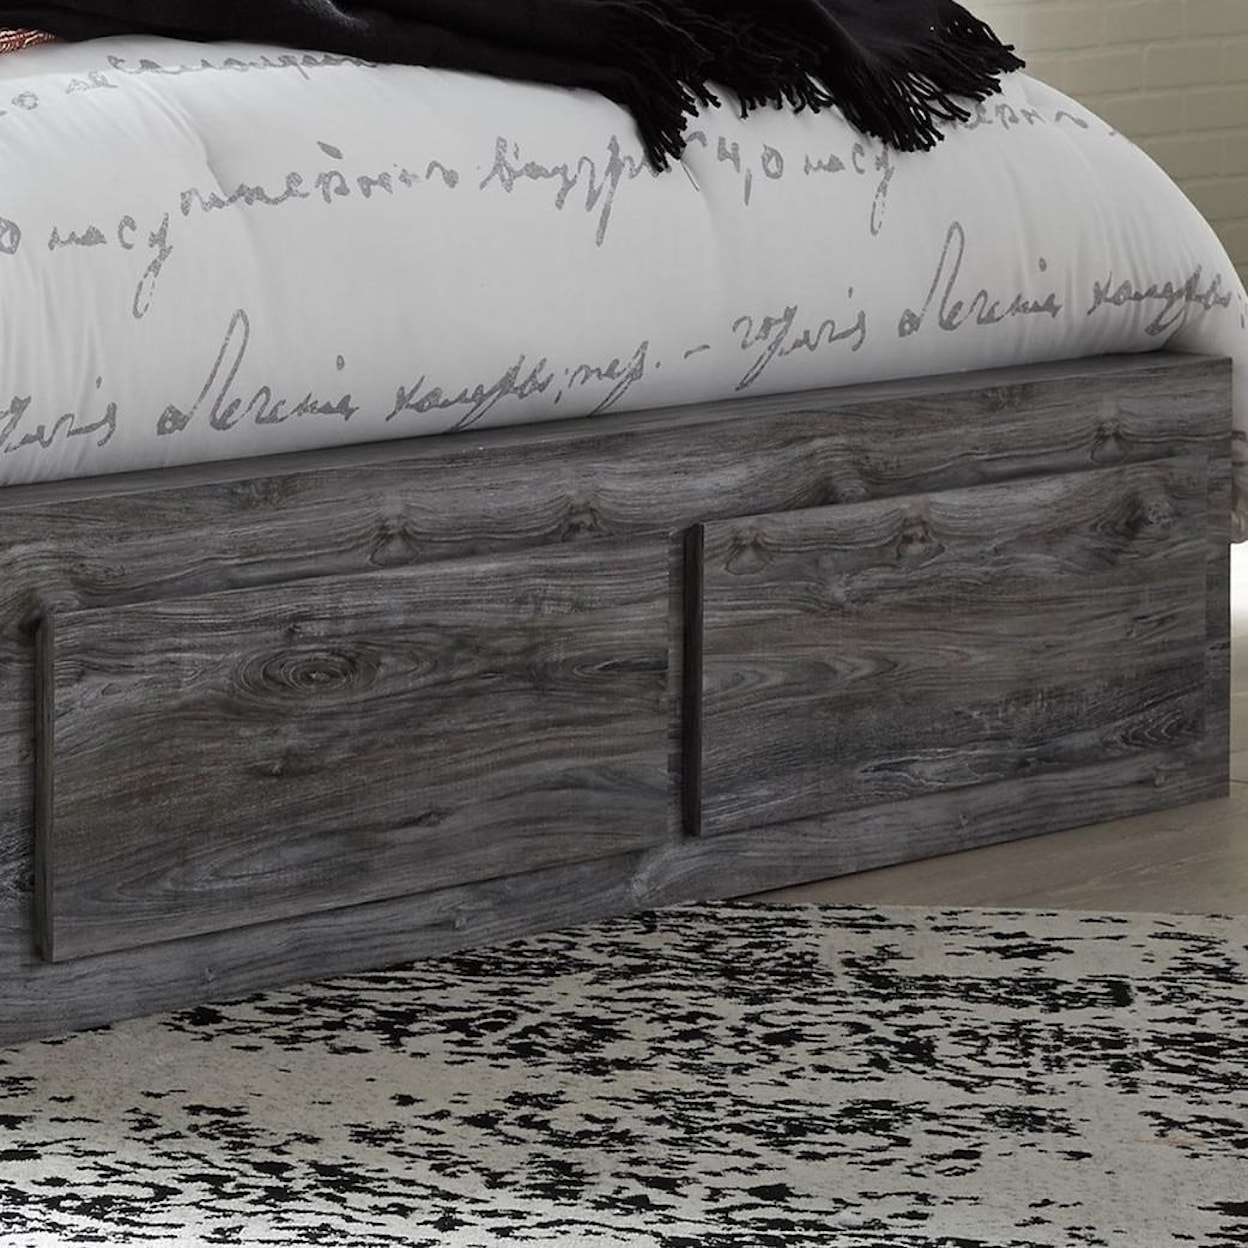 Signature Design by Ashley Baystorm Queen Panel Bed